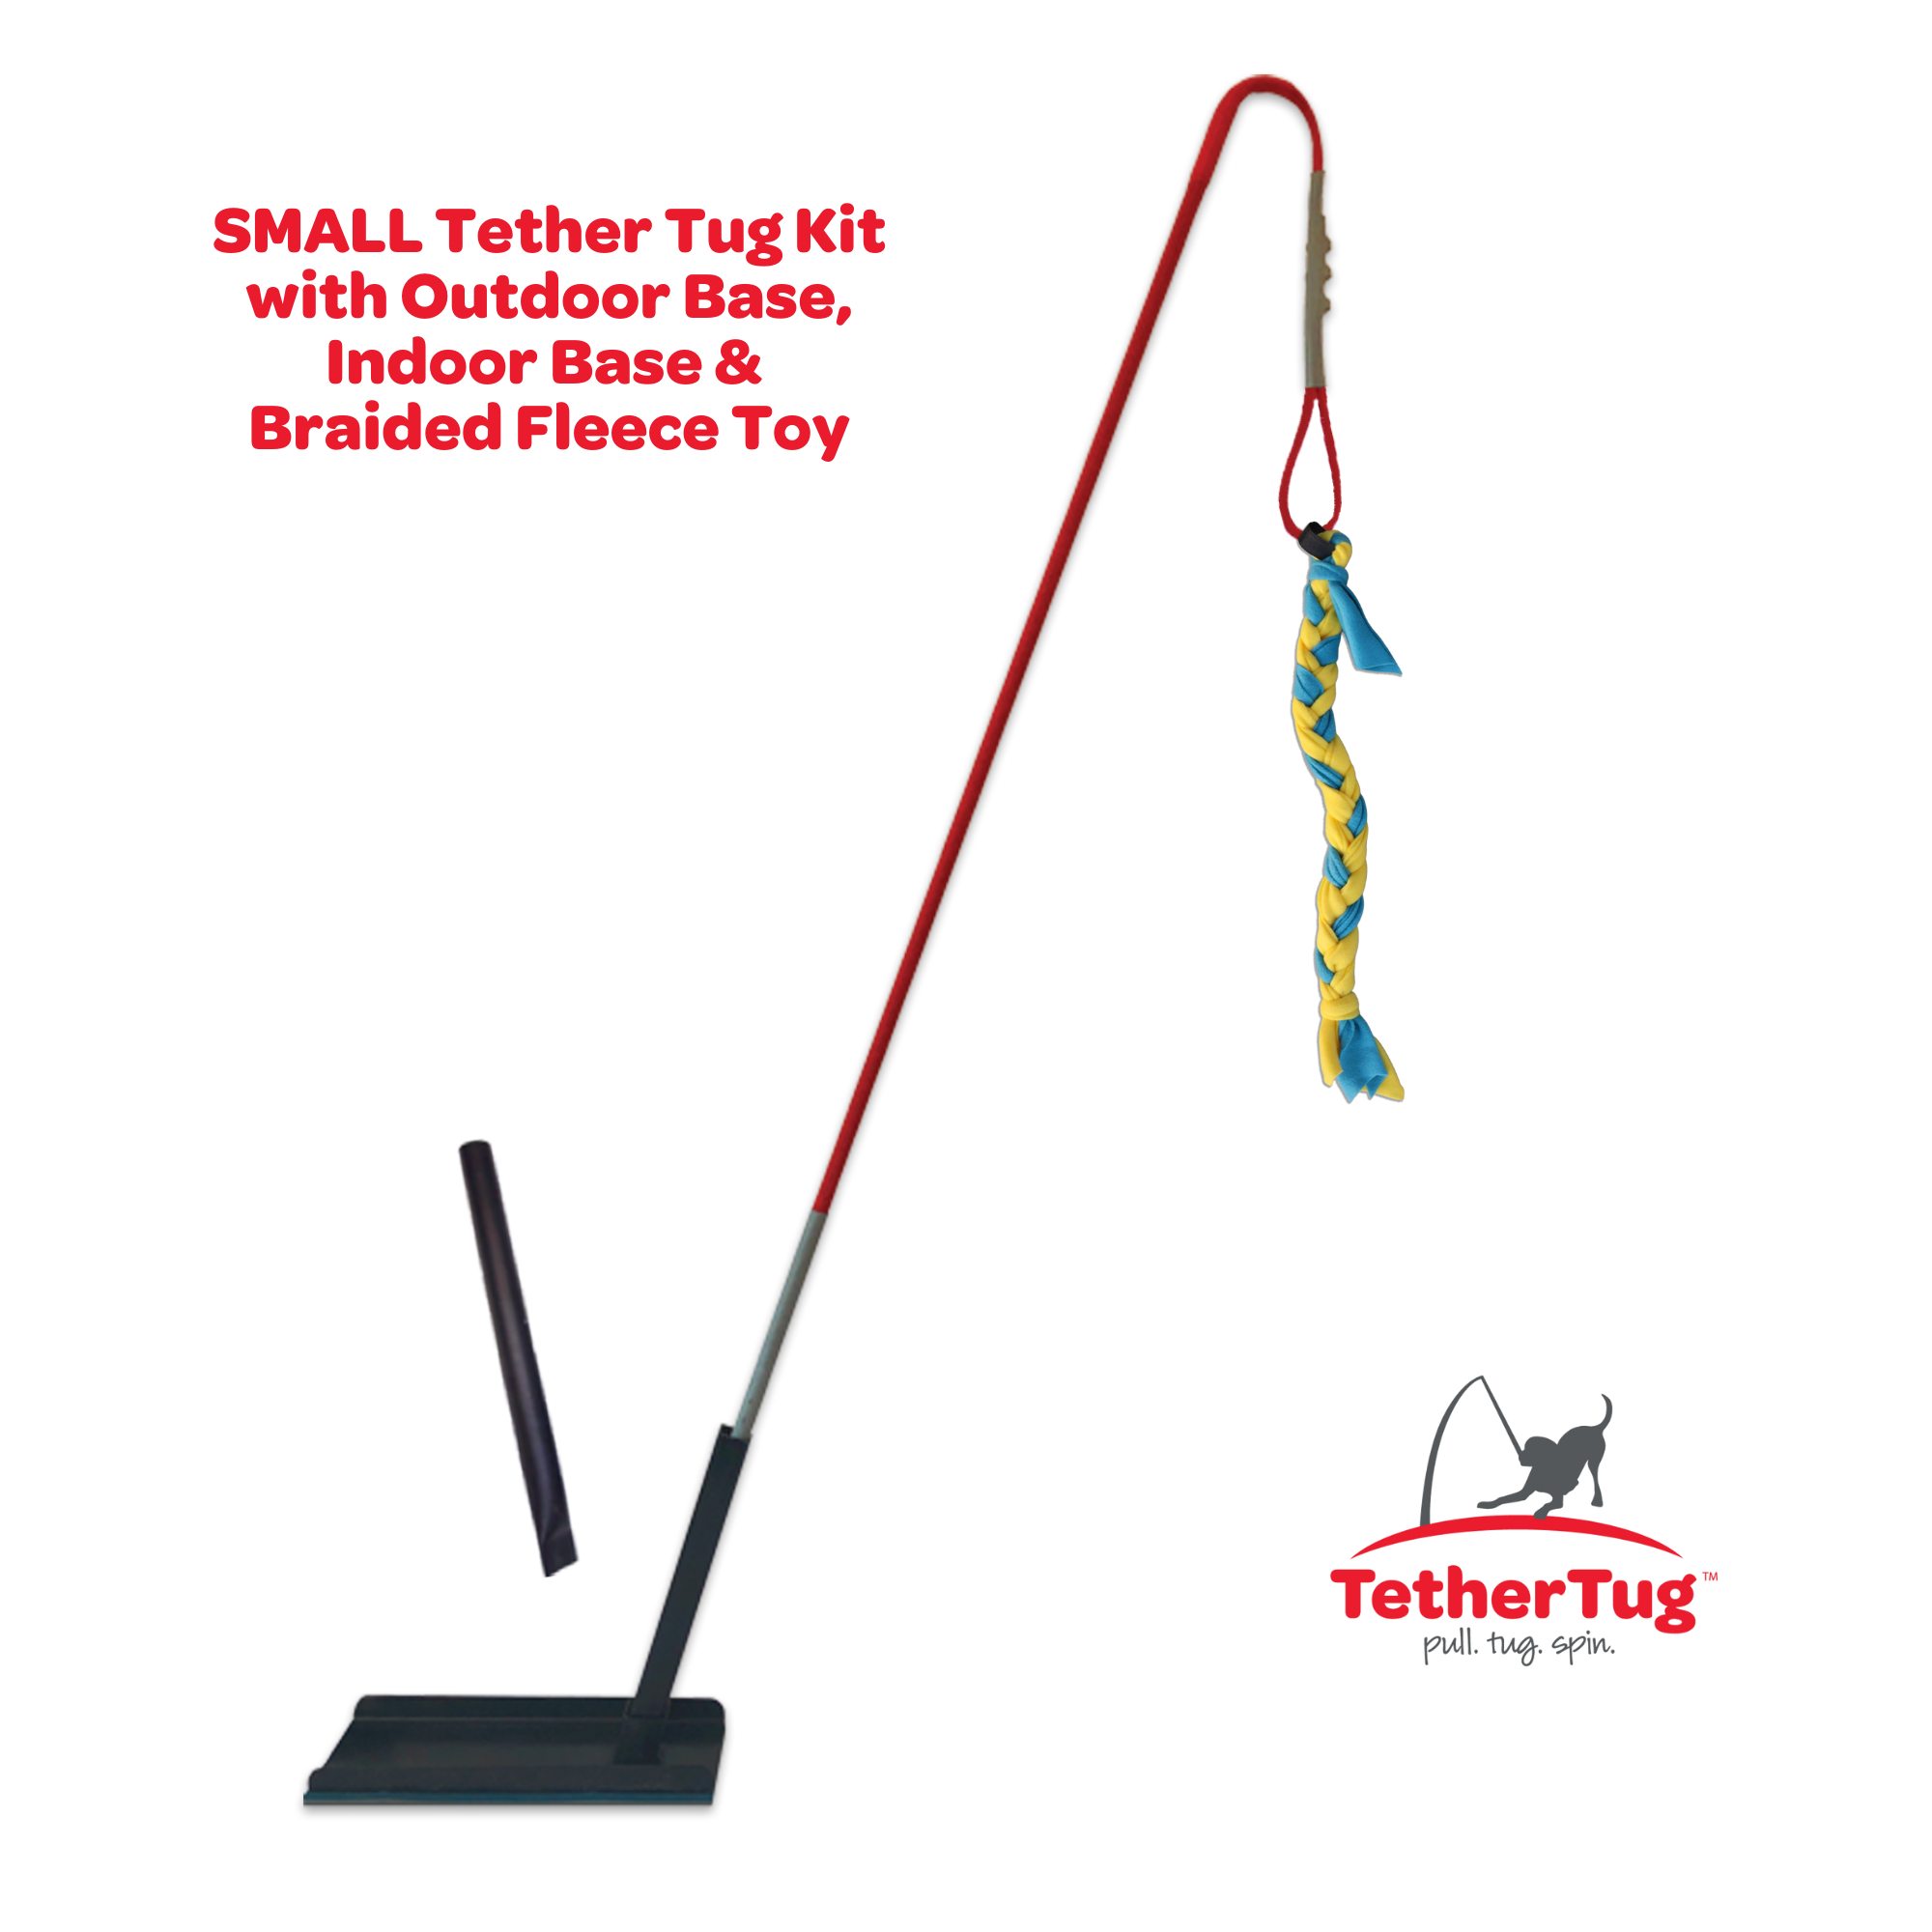 SMALL Outdoor & Indoor Tether Tug for Dogs Under 35 lbs.